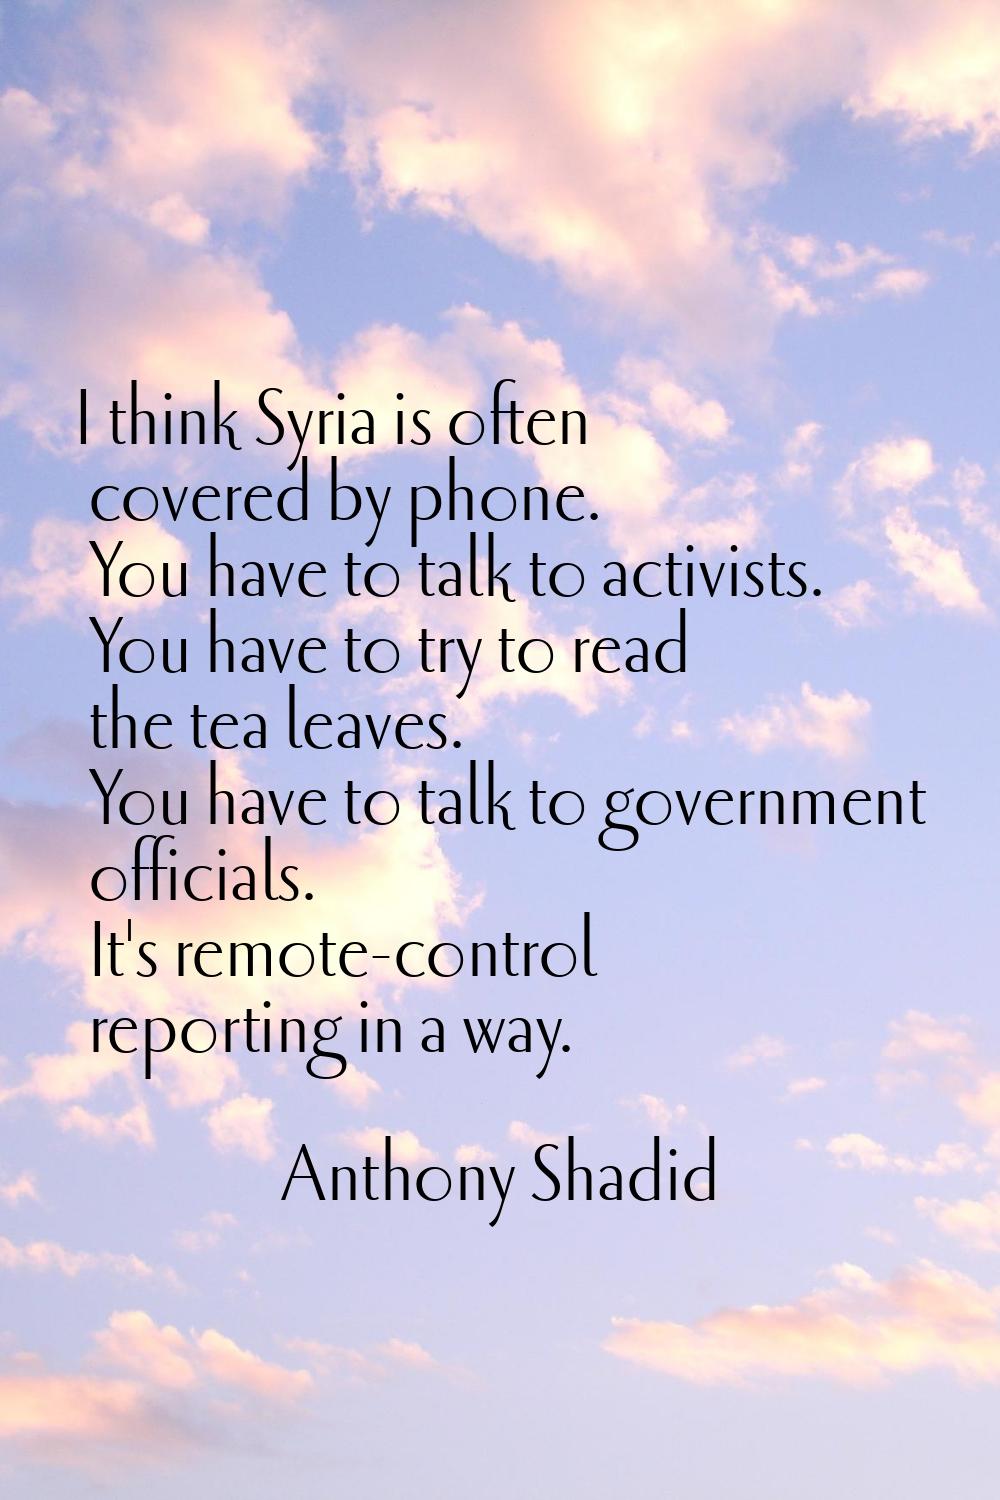 I think Syria is often covered by phone. You have to talk to activists. You have to try to read the